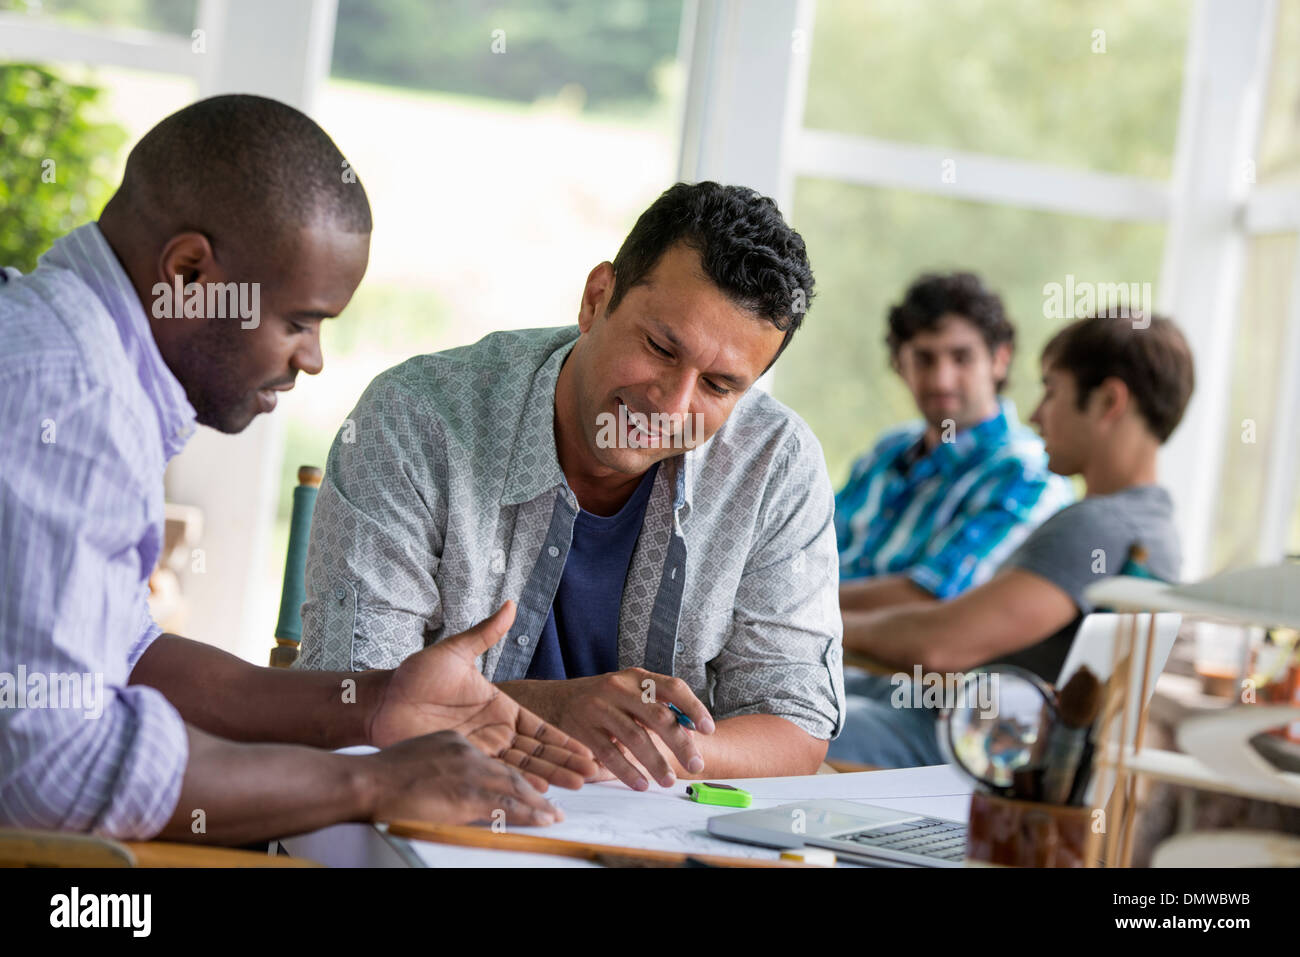 Two men seated working toger. Stock Photo